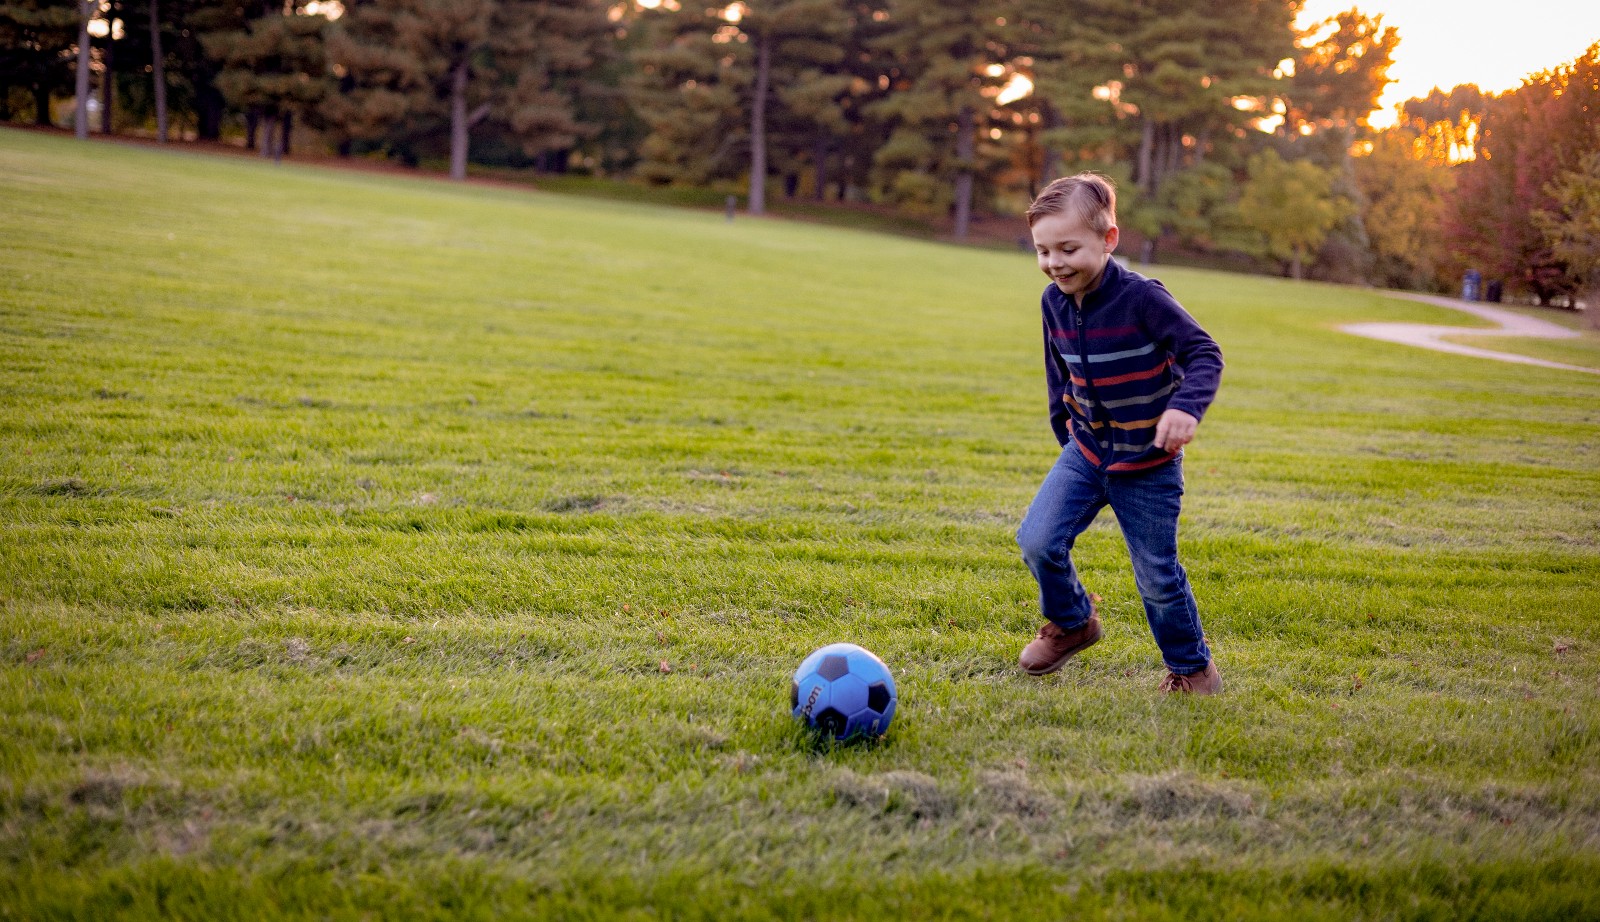 Miracle Child Benjamin kicks a blue soccer ball on a grassy field in Hershey as the sun sets